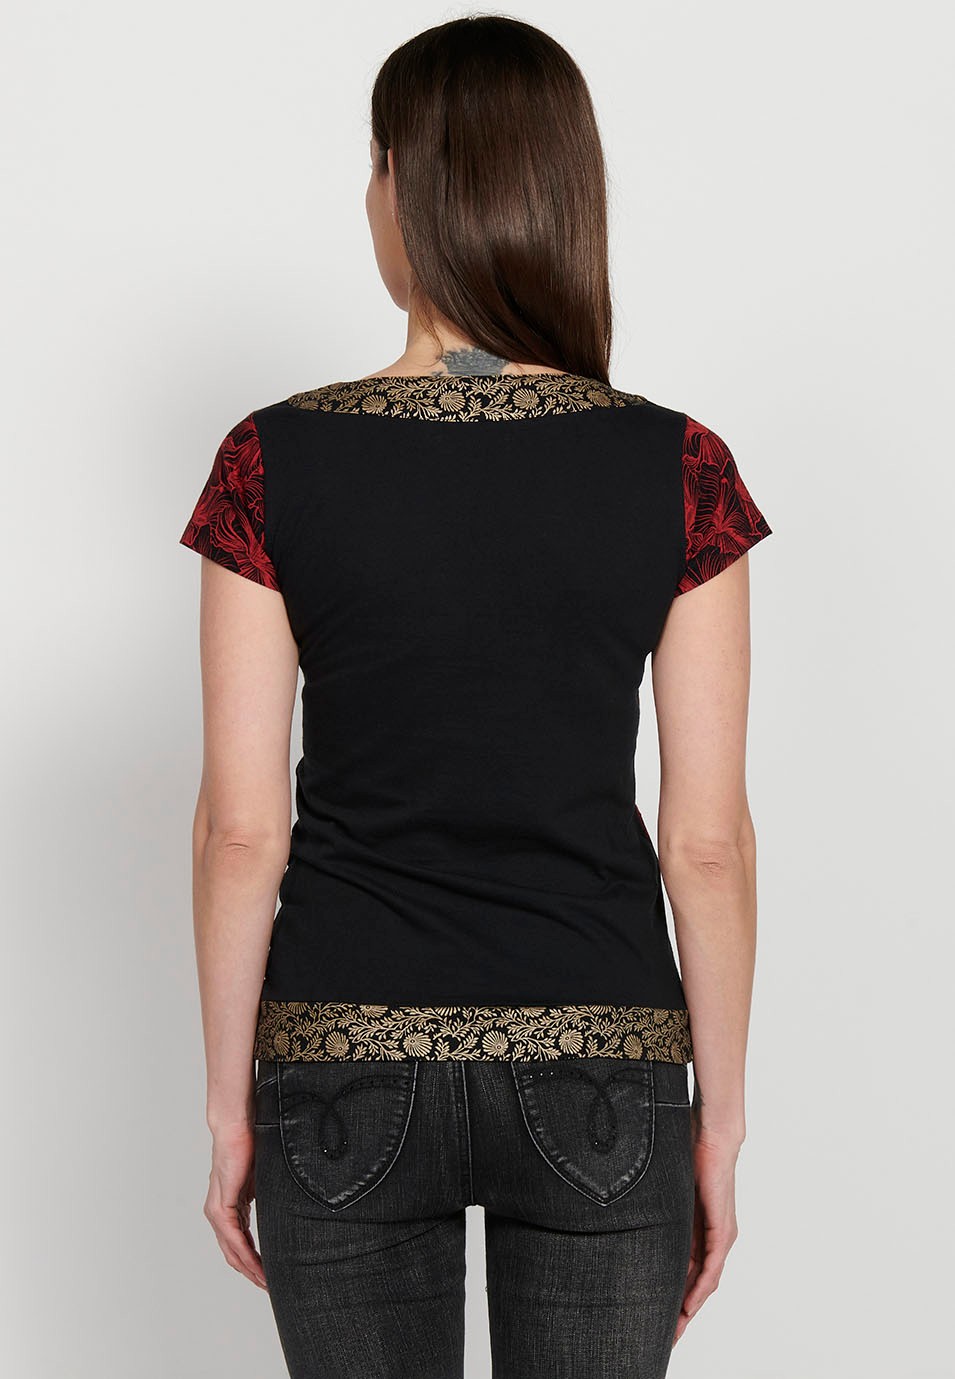 Women's short-sleeved V-neck T-shirt with multicolored floral embroidered details